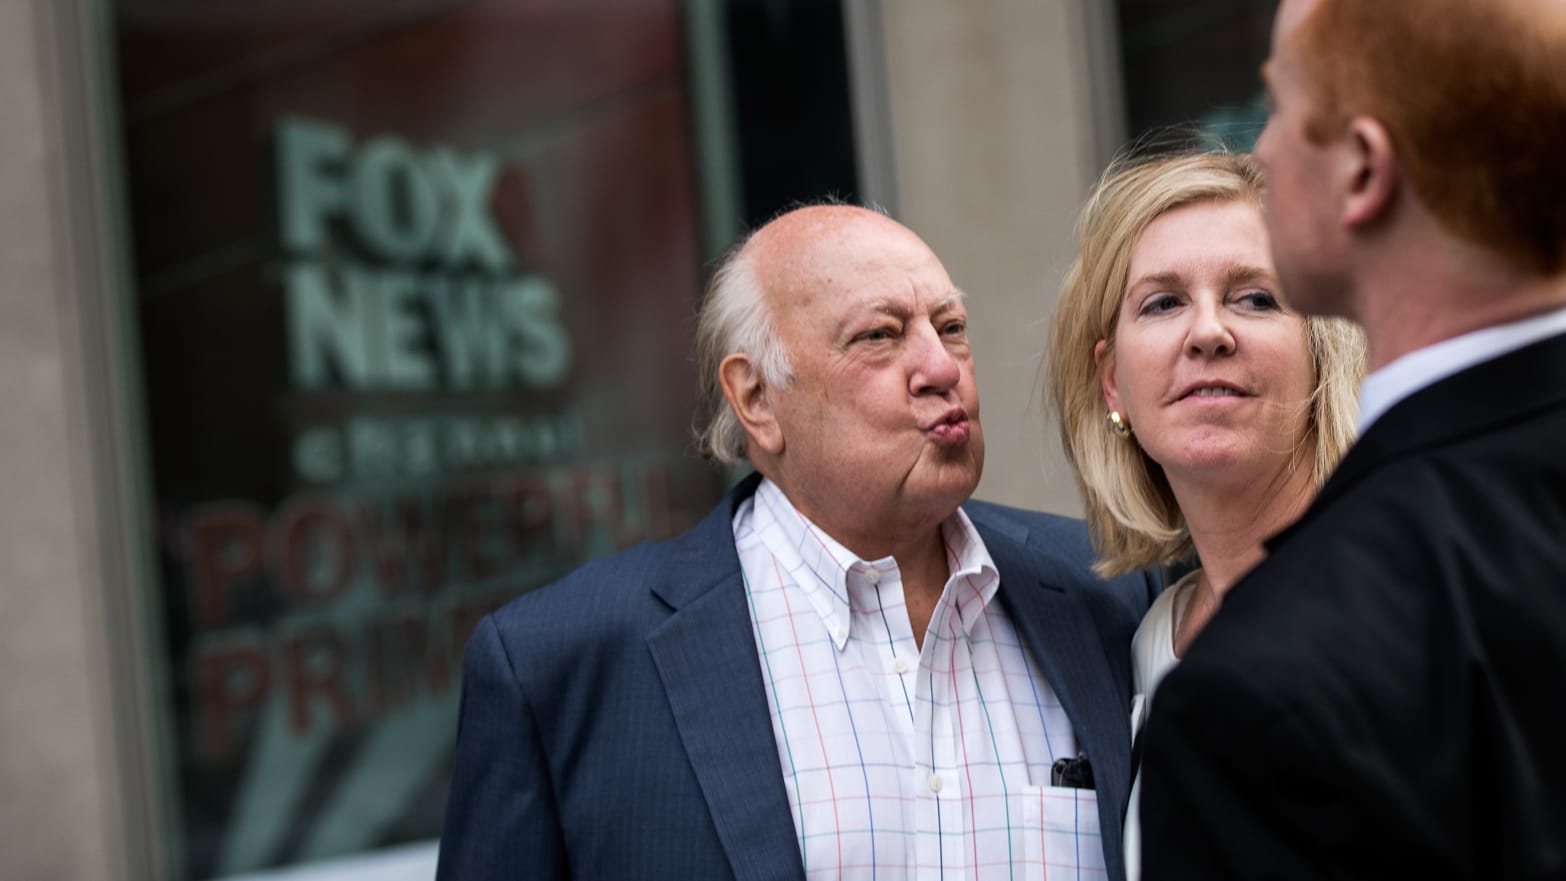 Fox News chairman Roger Ailes walks with his wife as they leave the News Corp building in New York City.